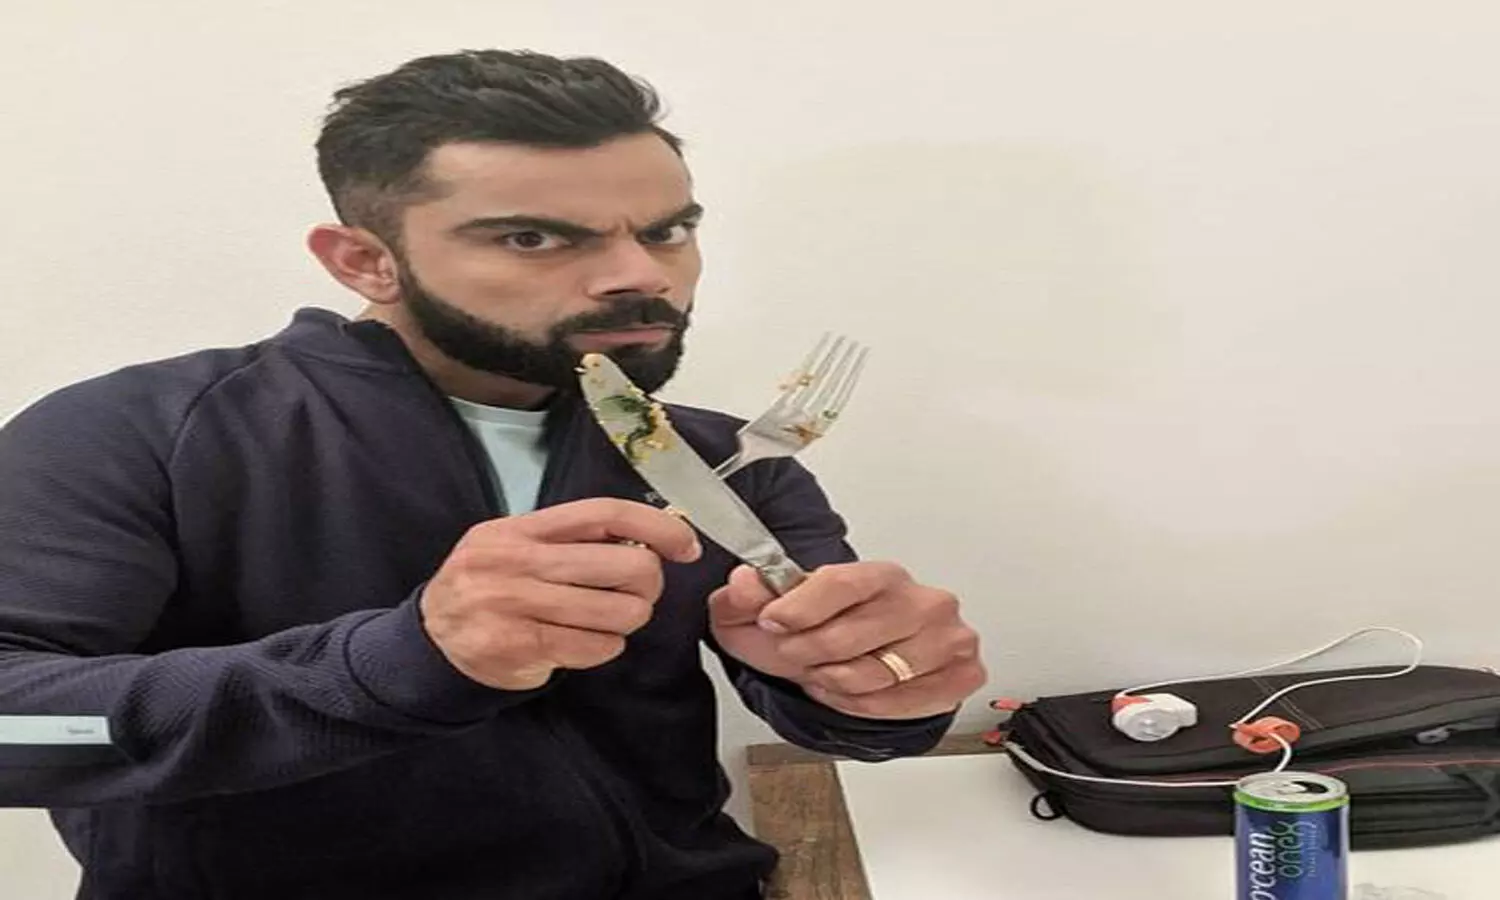 Virat Kohli replies to social media trolls about his diet, says never claimed to be vegan